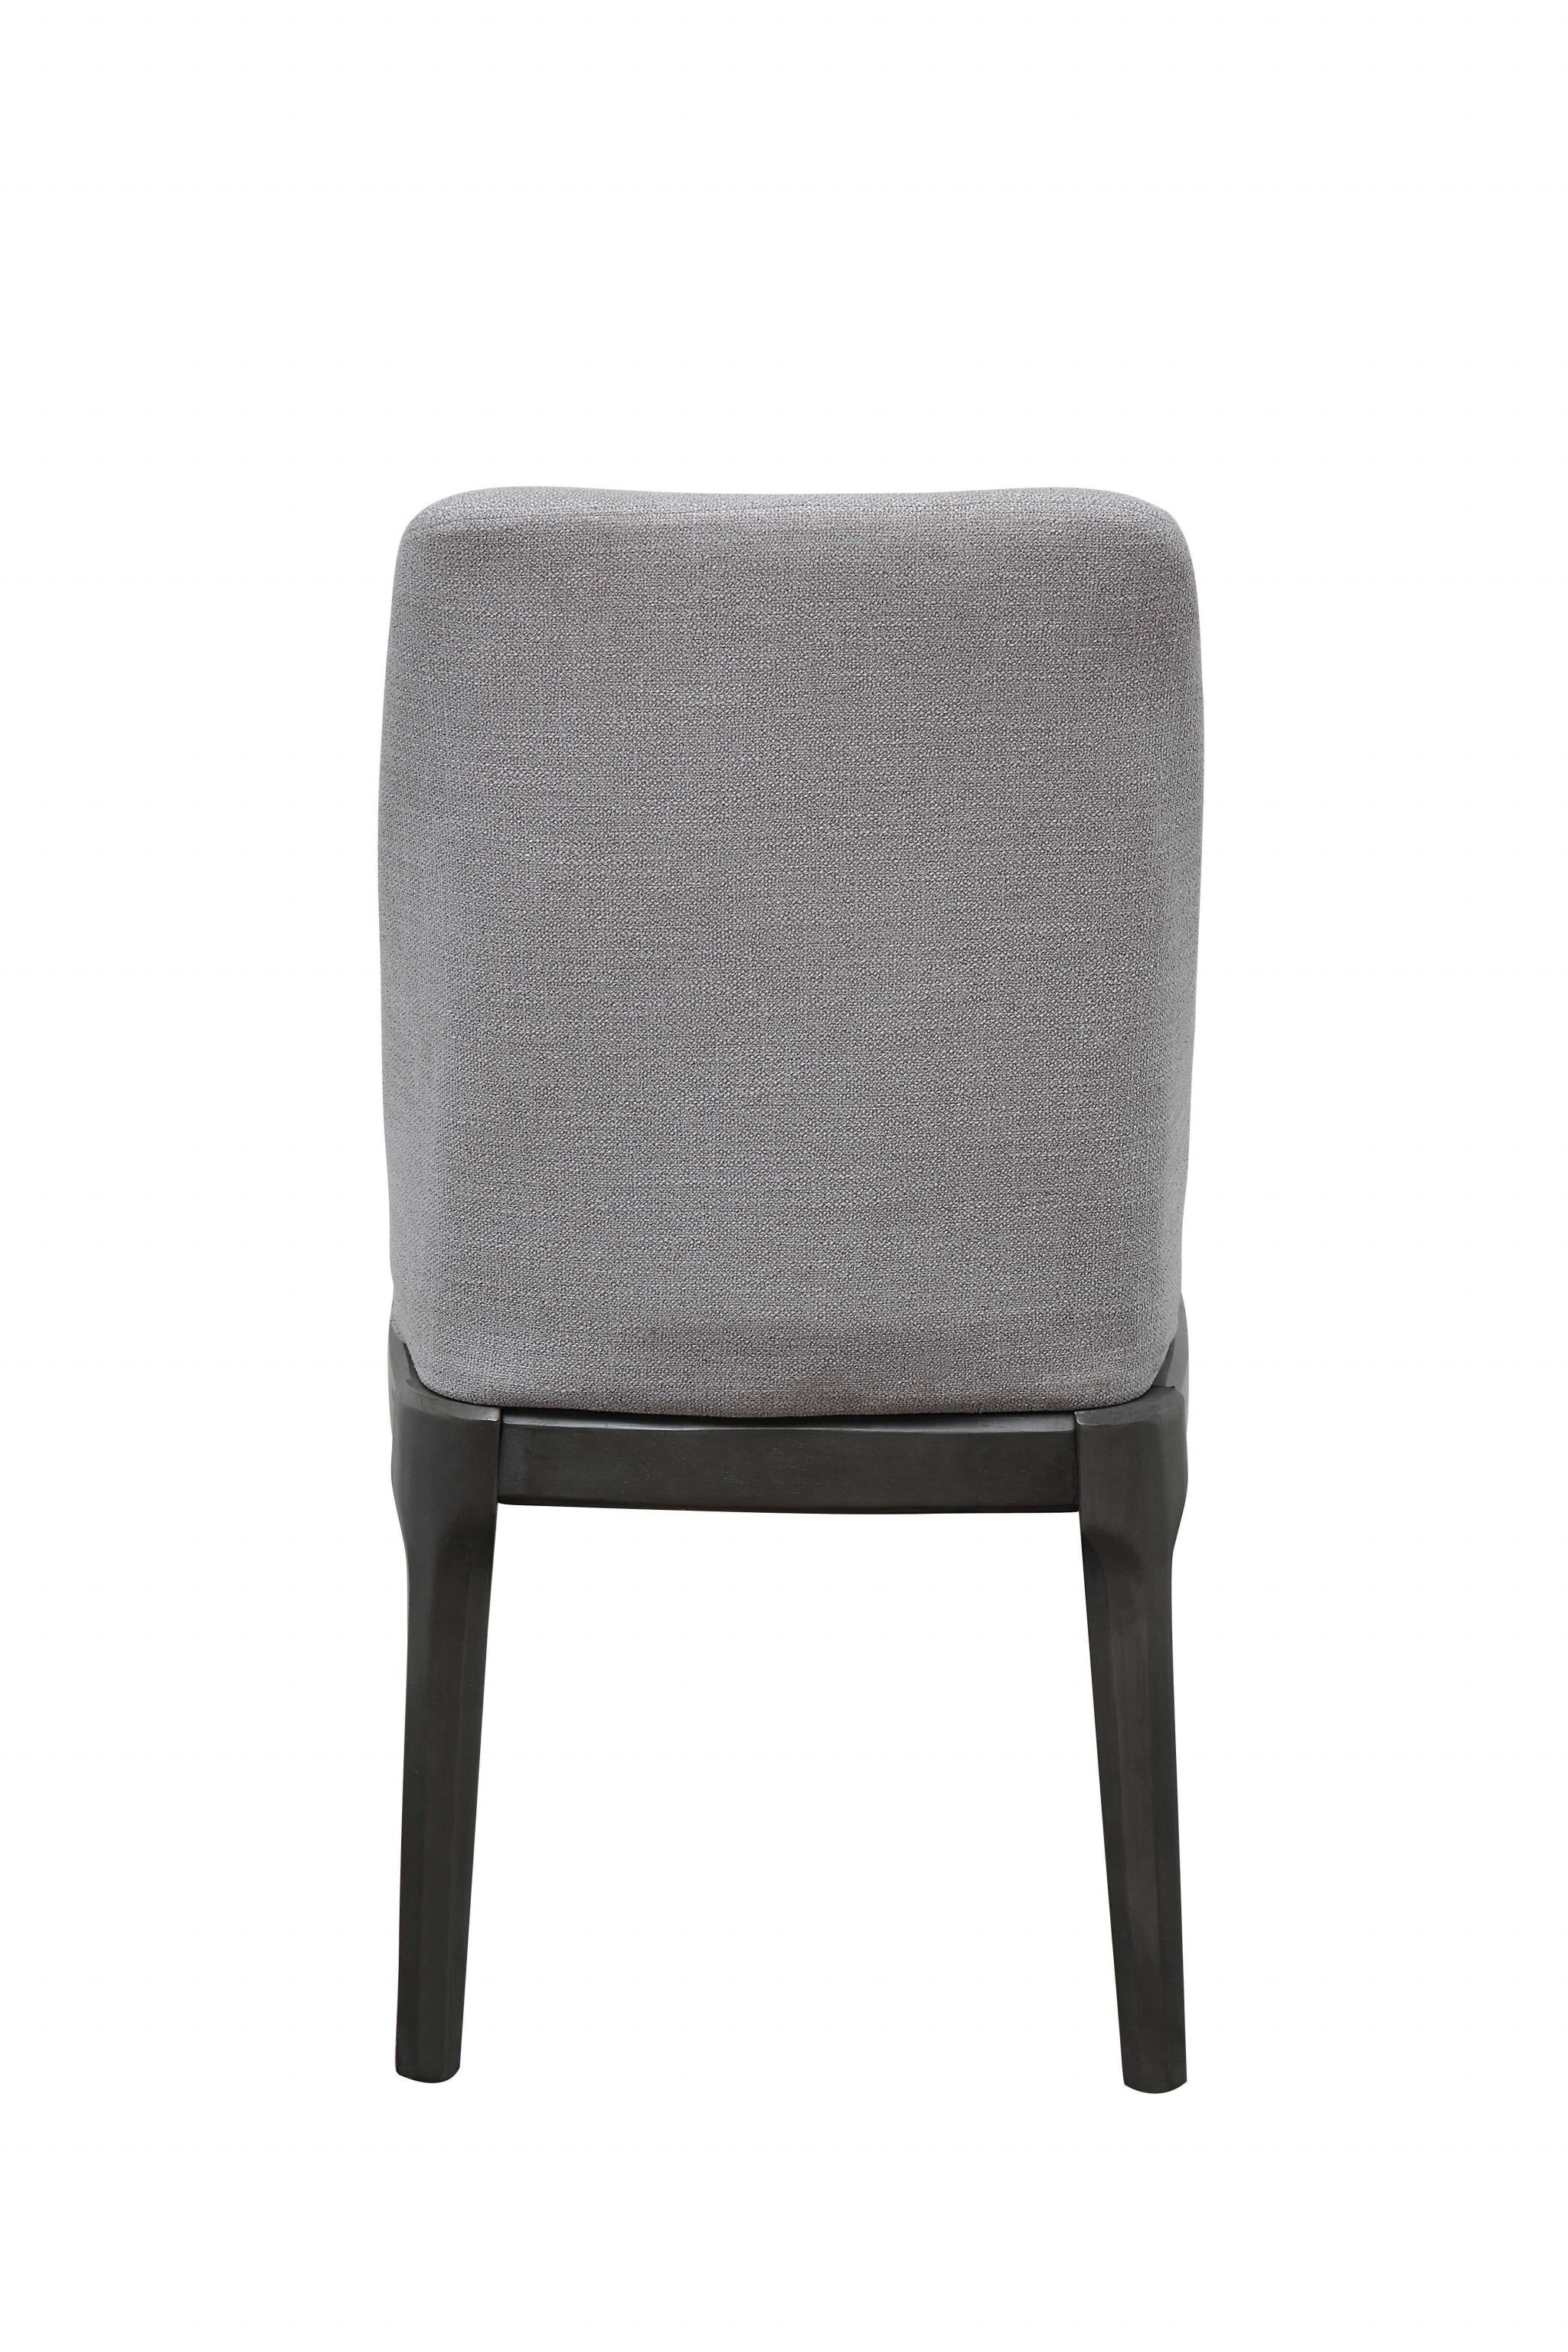 Set of Two Light Gray And Gray Upholstered Linen Dining Side Chairs